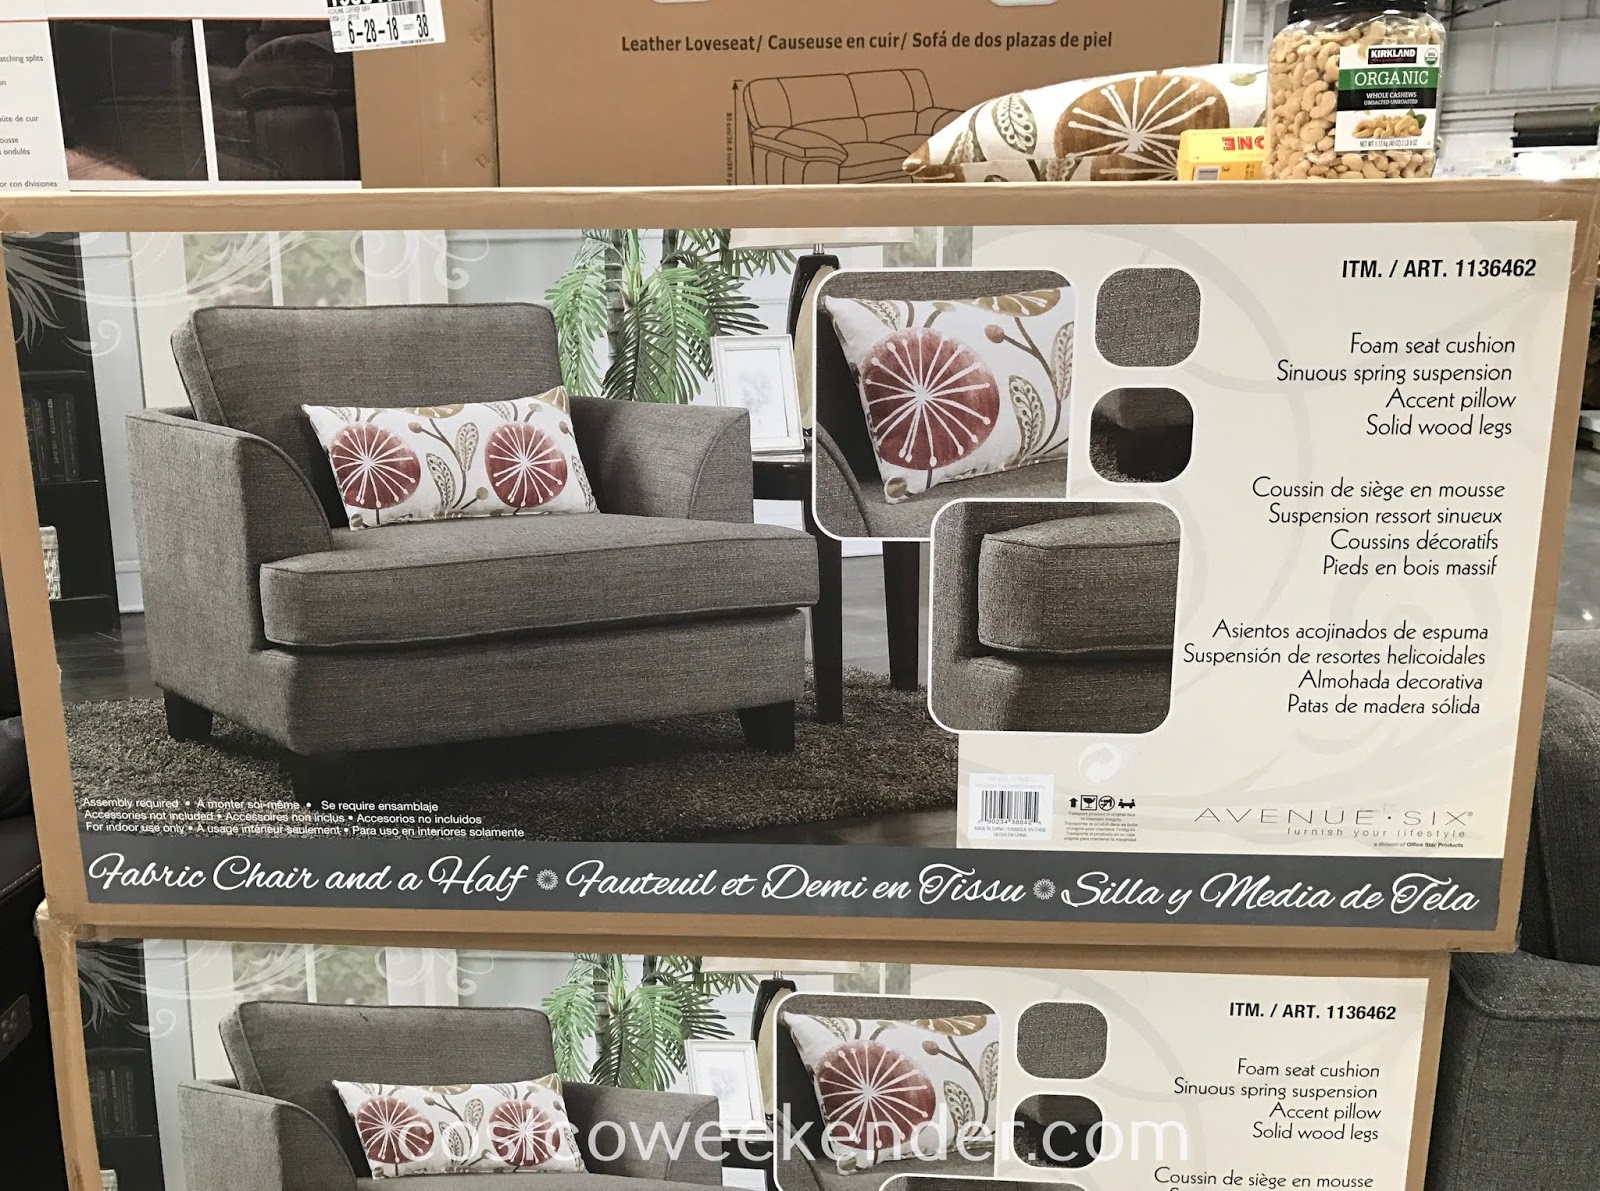 Avenue Six Fabric Chair And A Half Costco Weekender